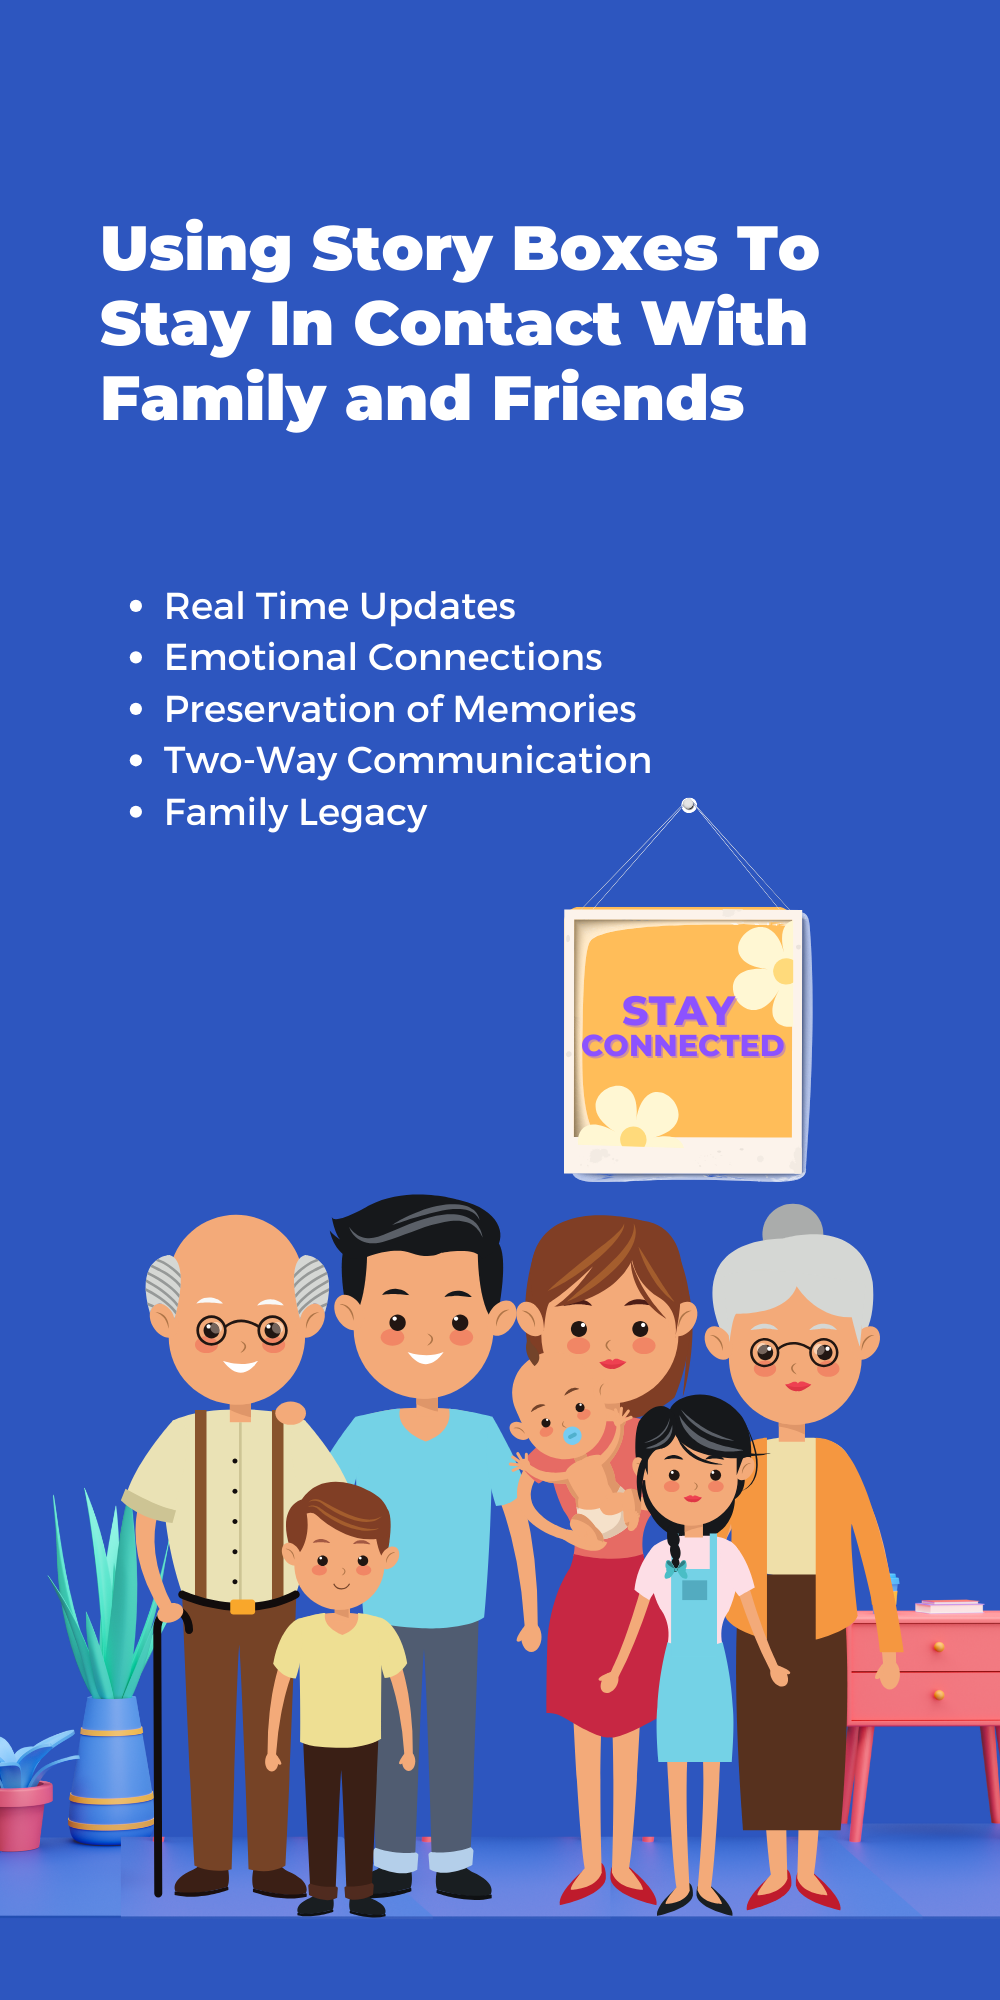 Using Story Boxes To Stay Connected With Family and Friends